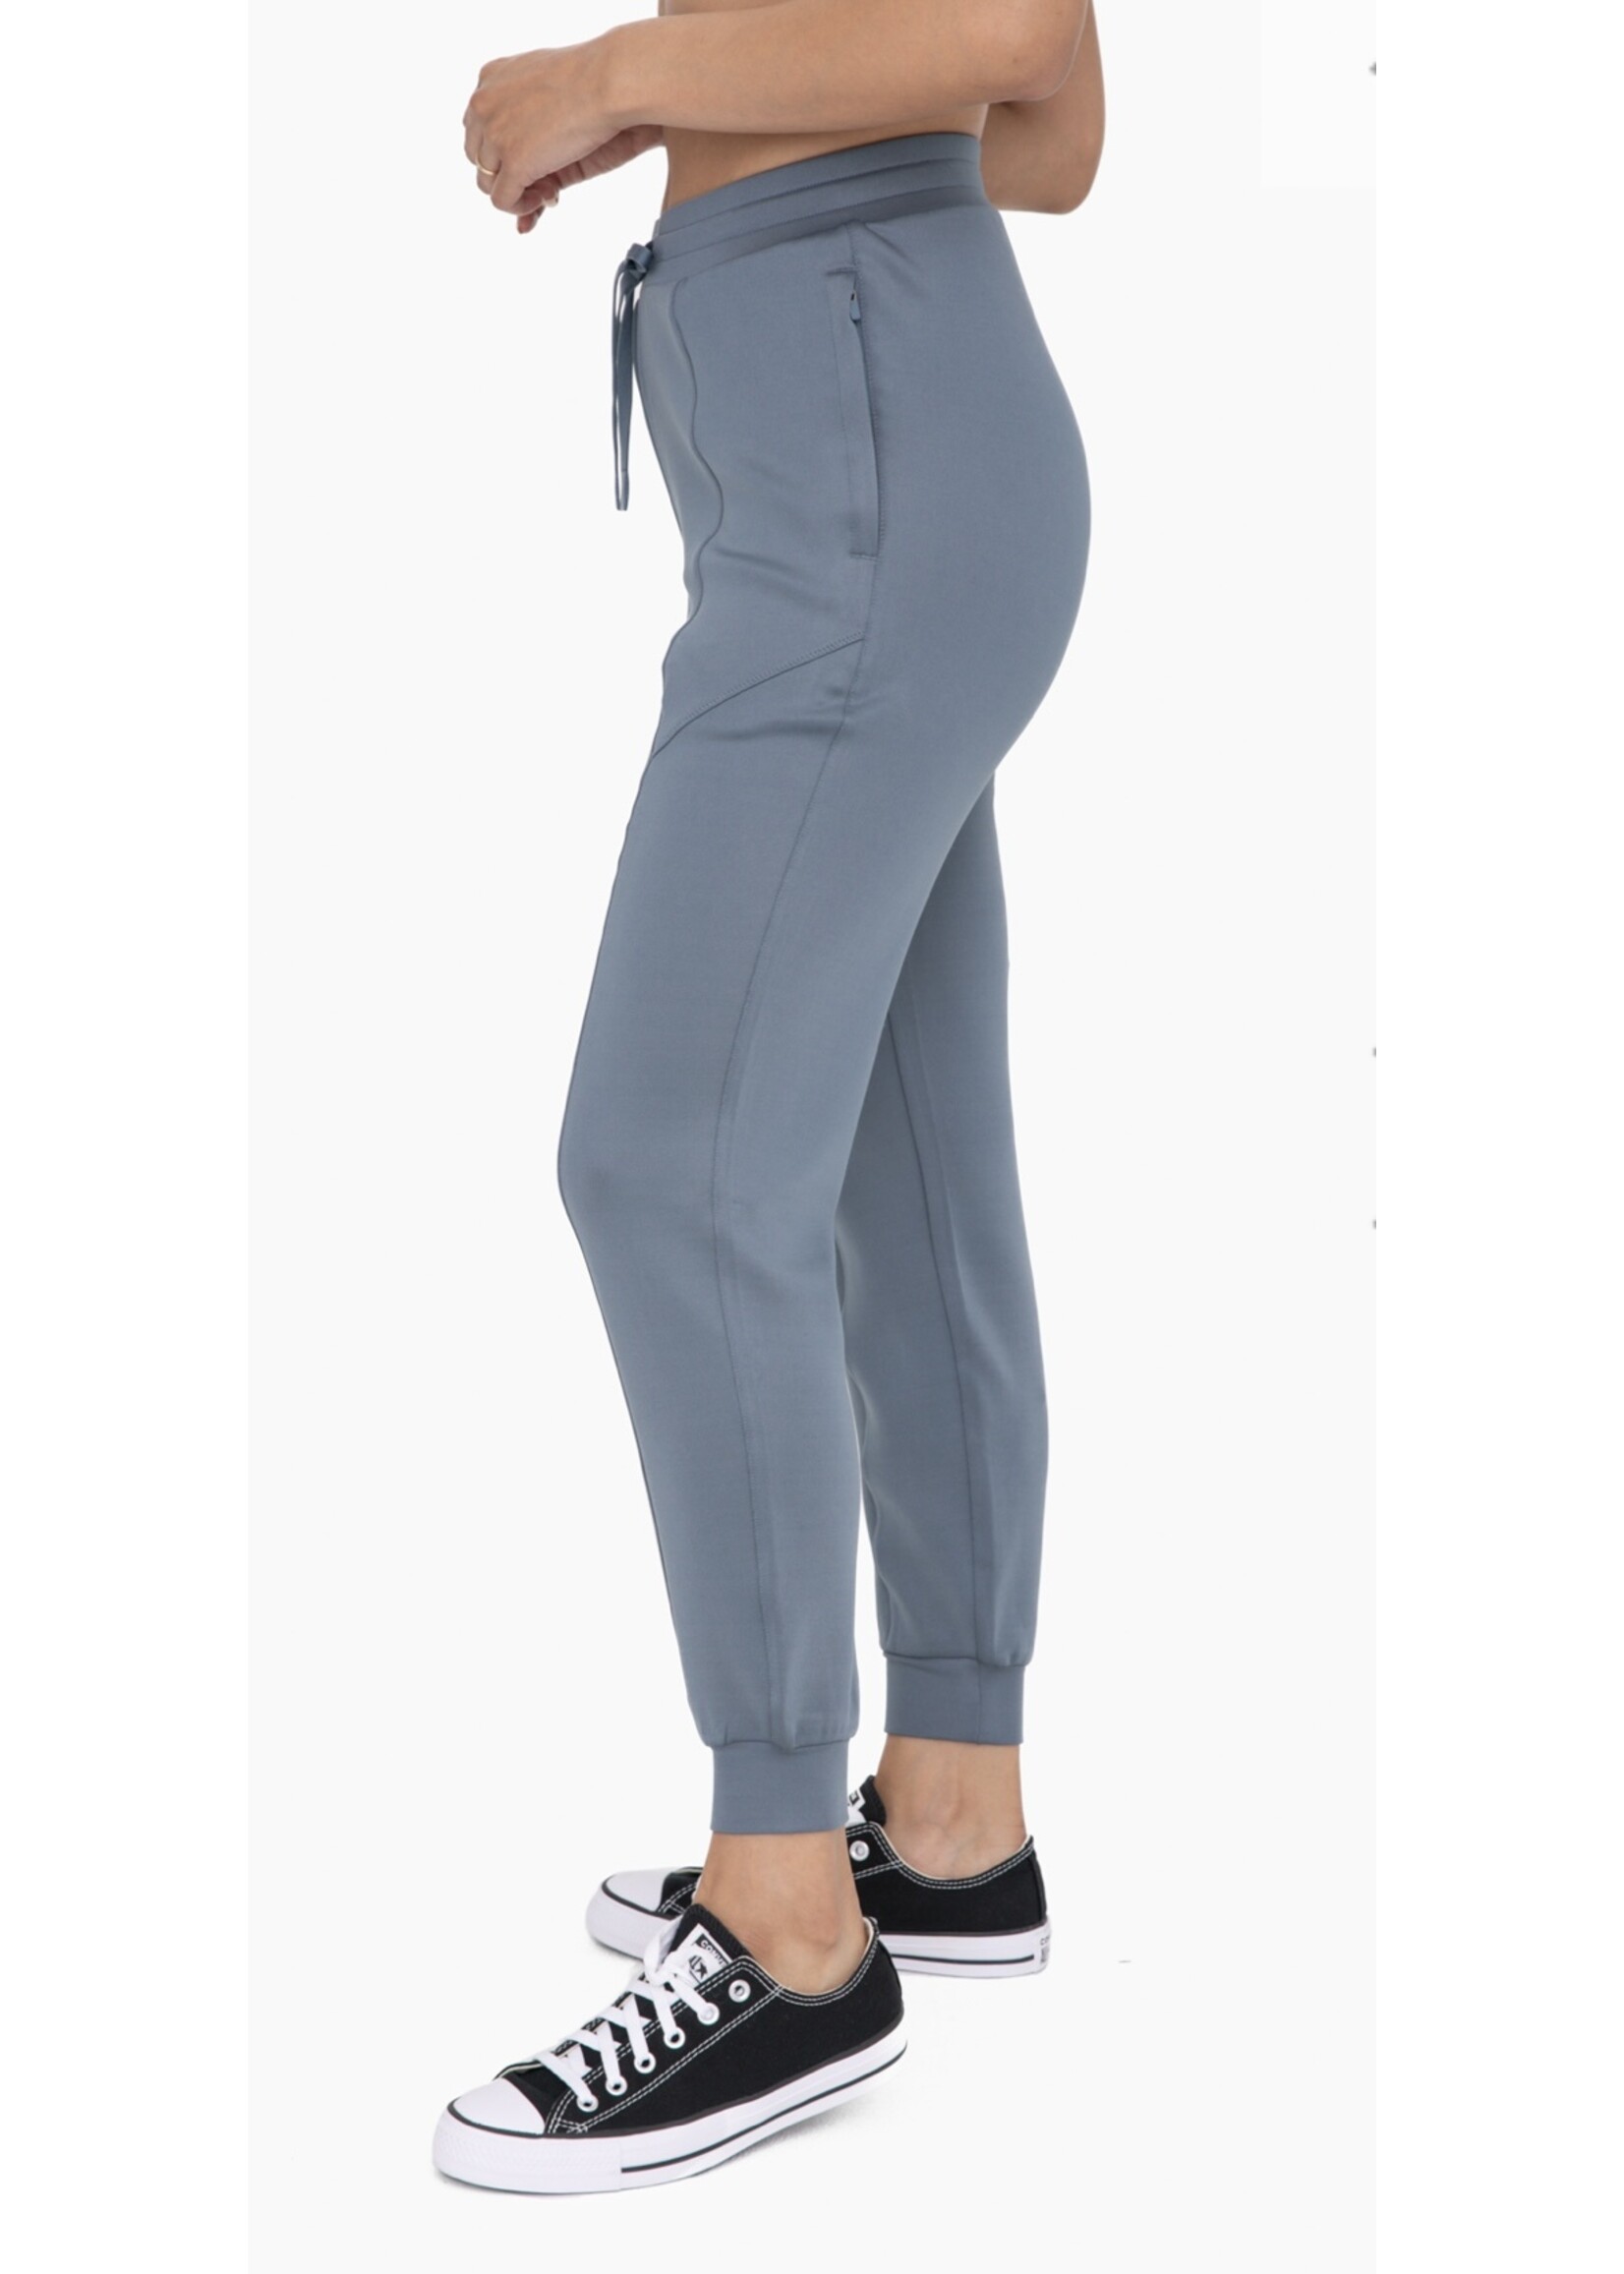 CUFFED JOGGERS WITH ZIPPERRED POCKETS